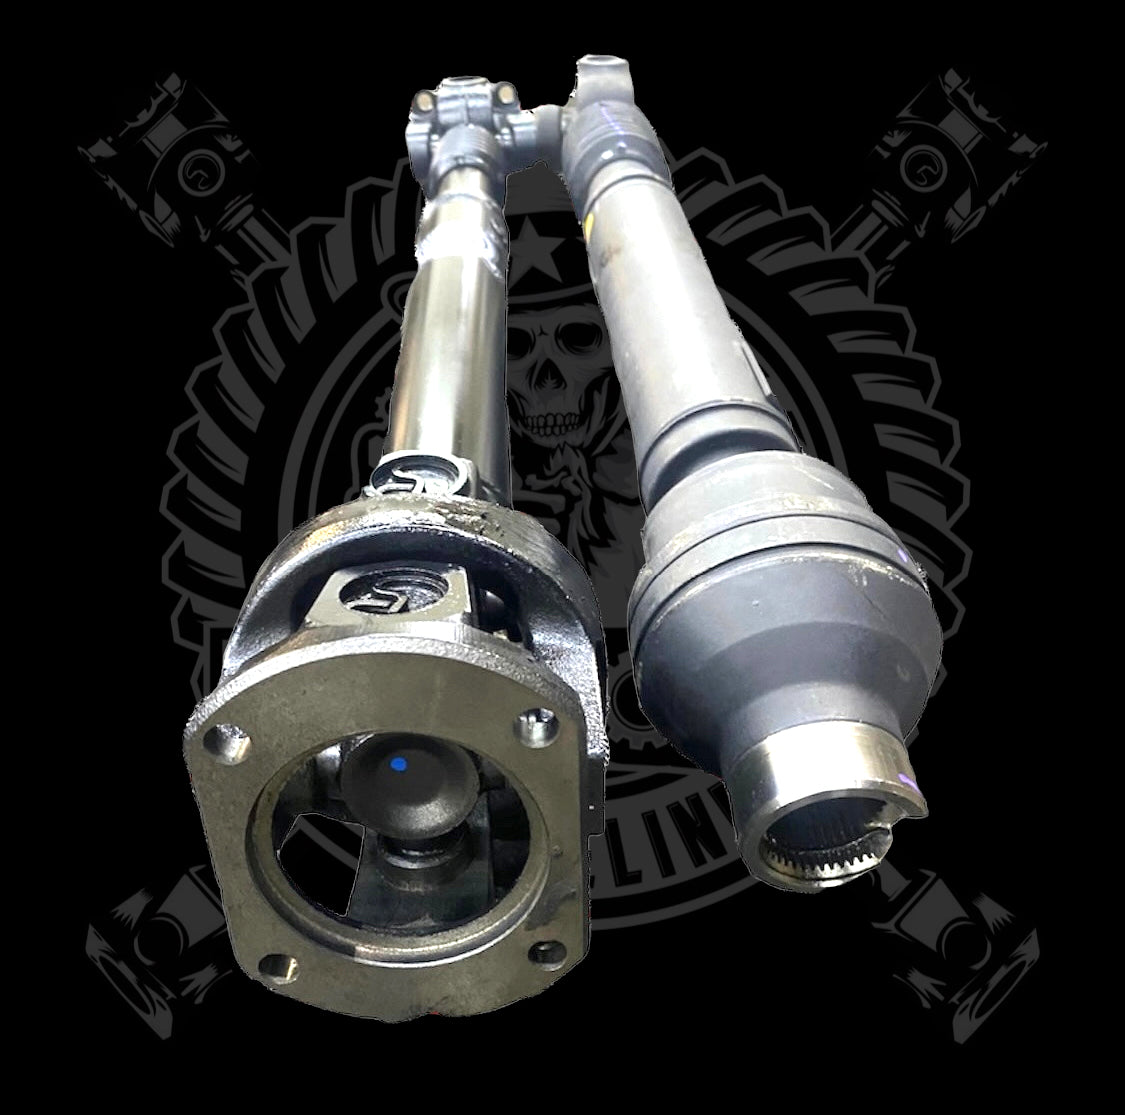 2019-2024 Dodge Ram 4500/5500 DP 5th Gen Upgraded 1410 or 1350 Series High Angle Double Cardan Front Driveshaft with New Transfer Case bolt-on style Flange Yoke Mopar 68312640AC, 68312640AD, 68312640AE, 68312646AC, 68312646AD